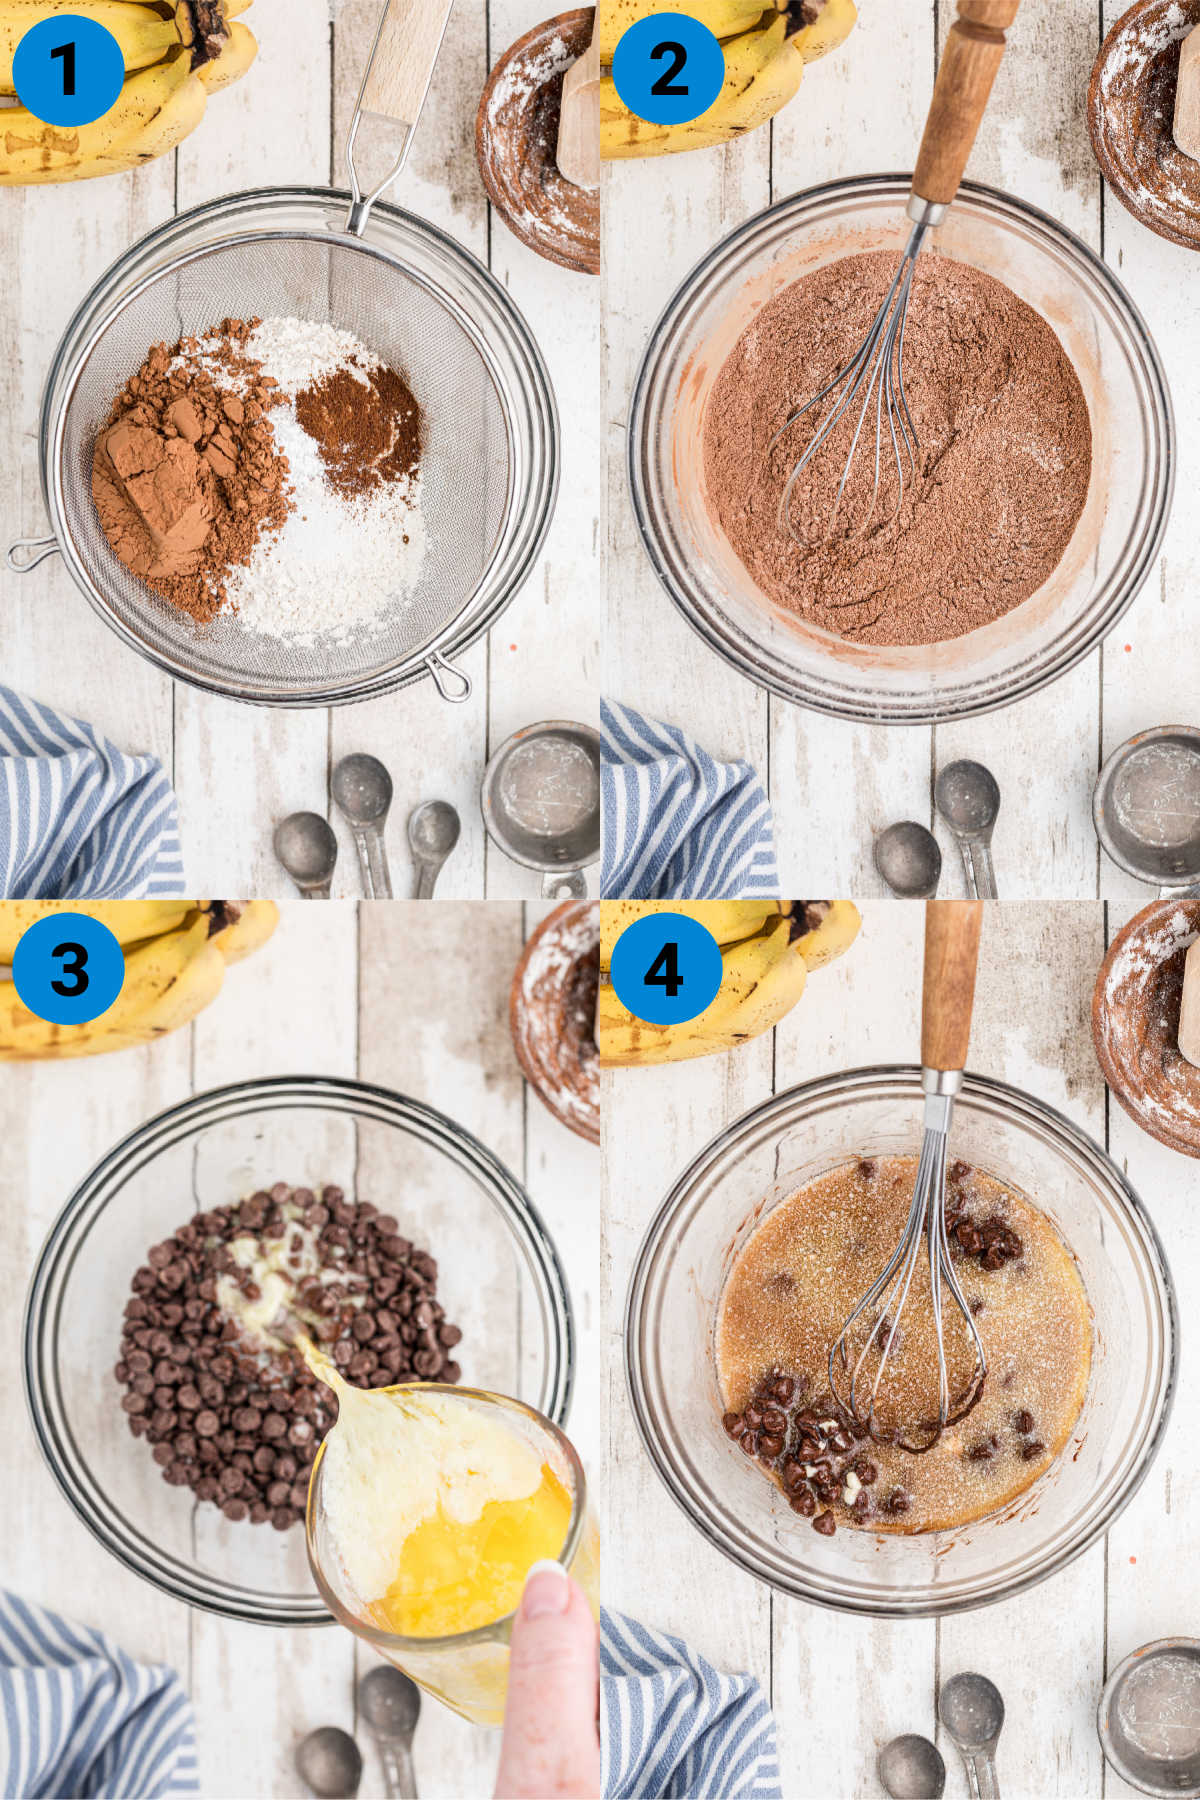 four images showing process steps on how to make banana brownies, this is steps 1-4